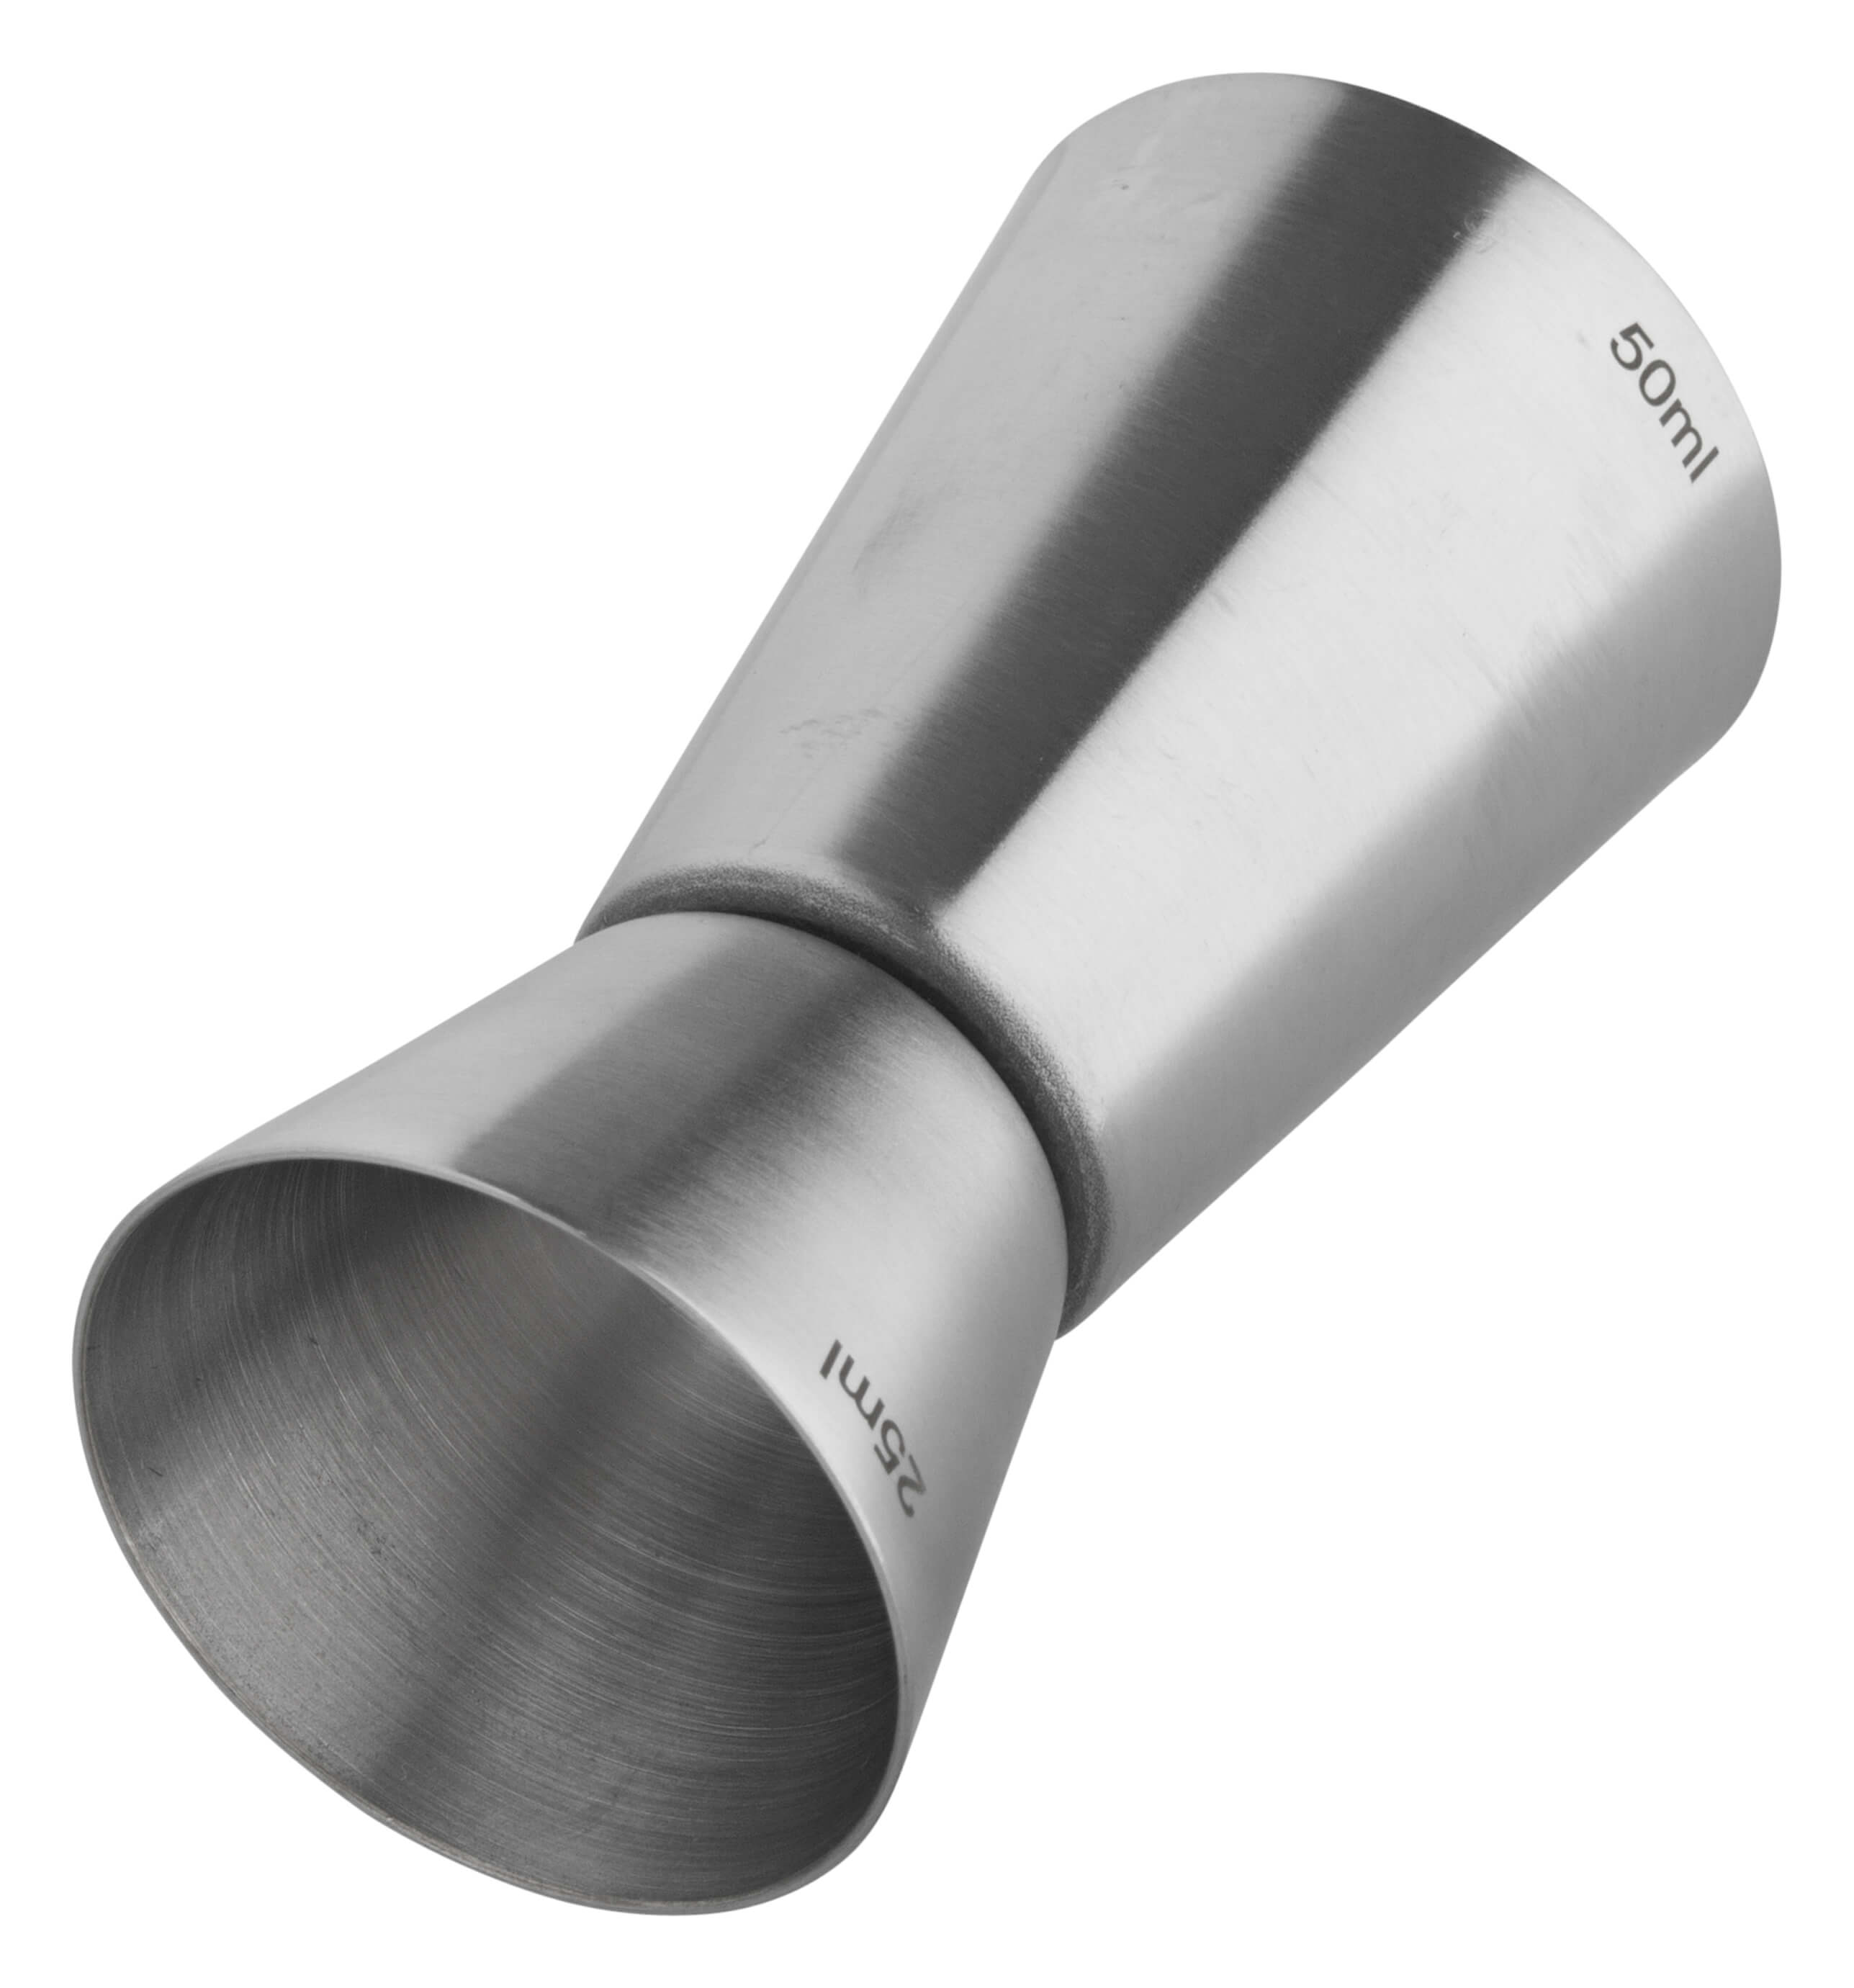 Double jigger, brushed - stainless steel (25/50ml)